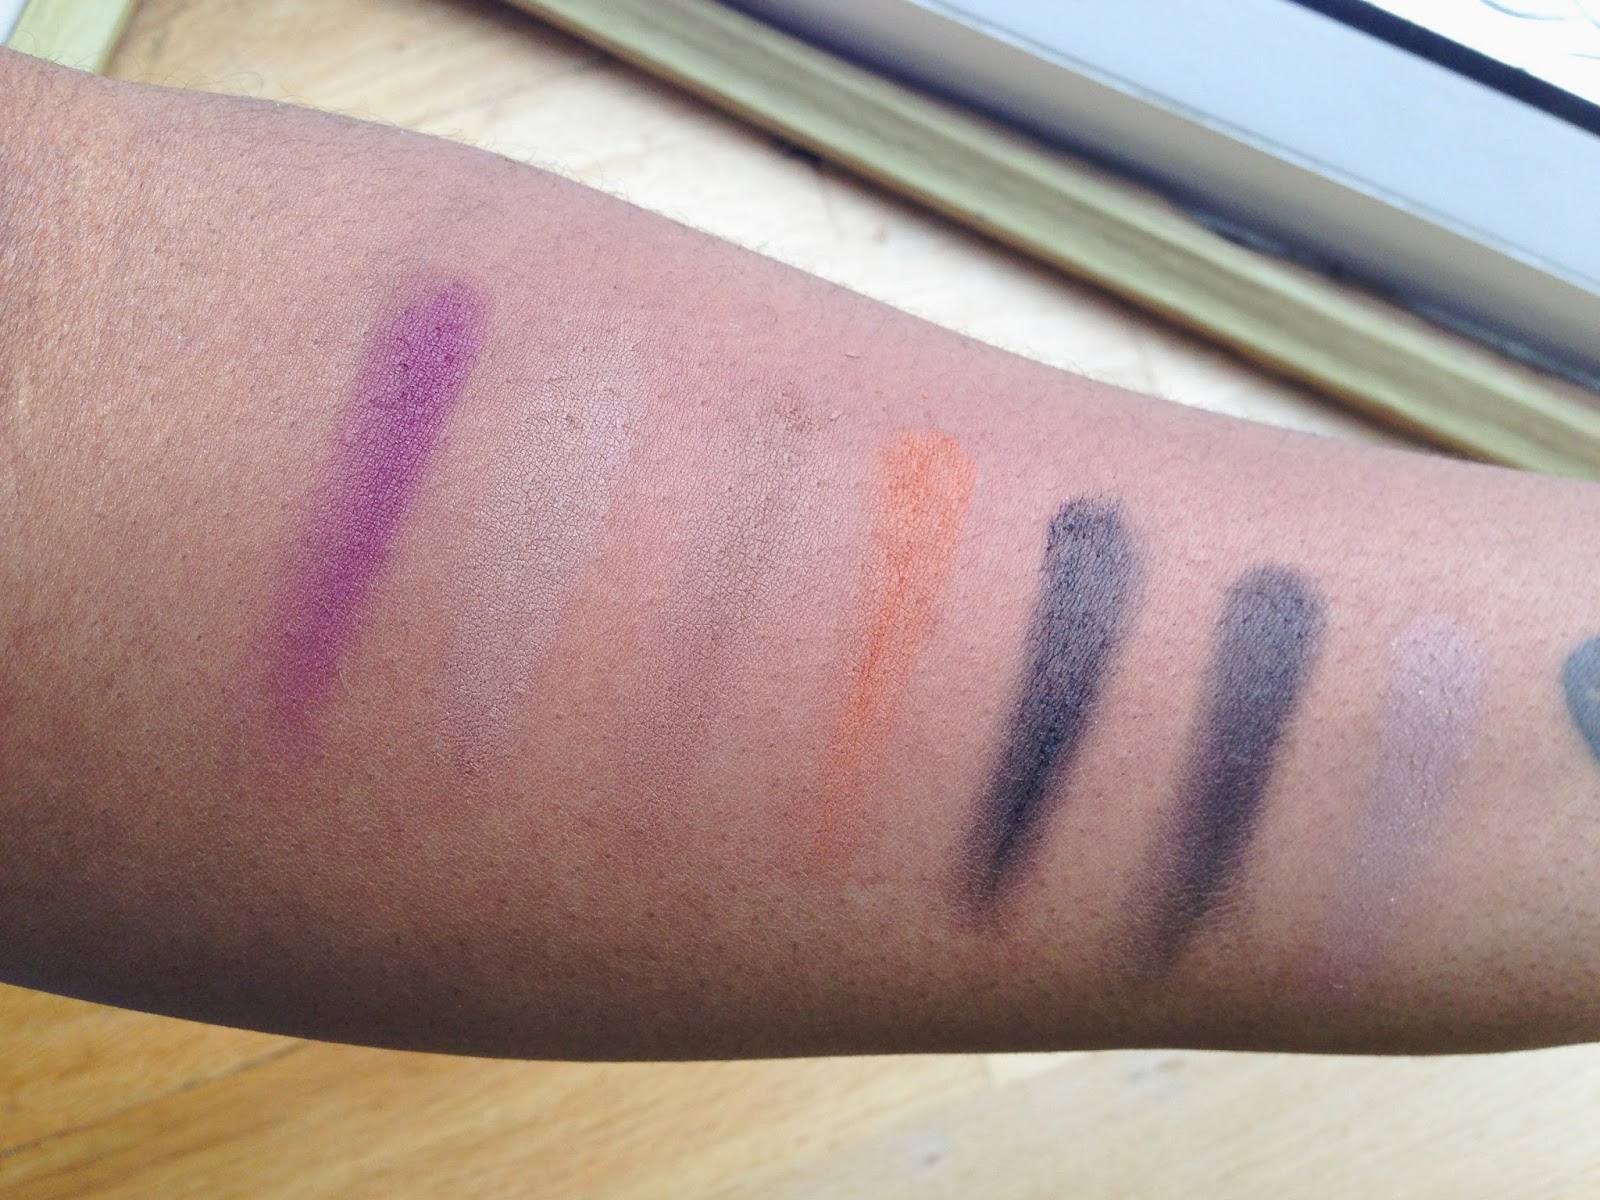 Coastal Scents Hot Pots Swatches Discoveries Of Self Blog